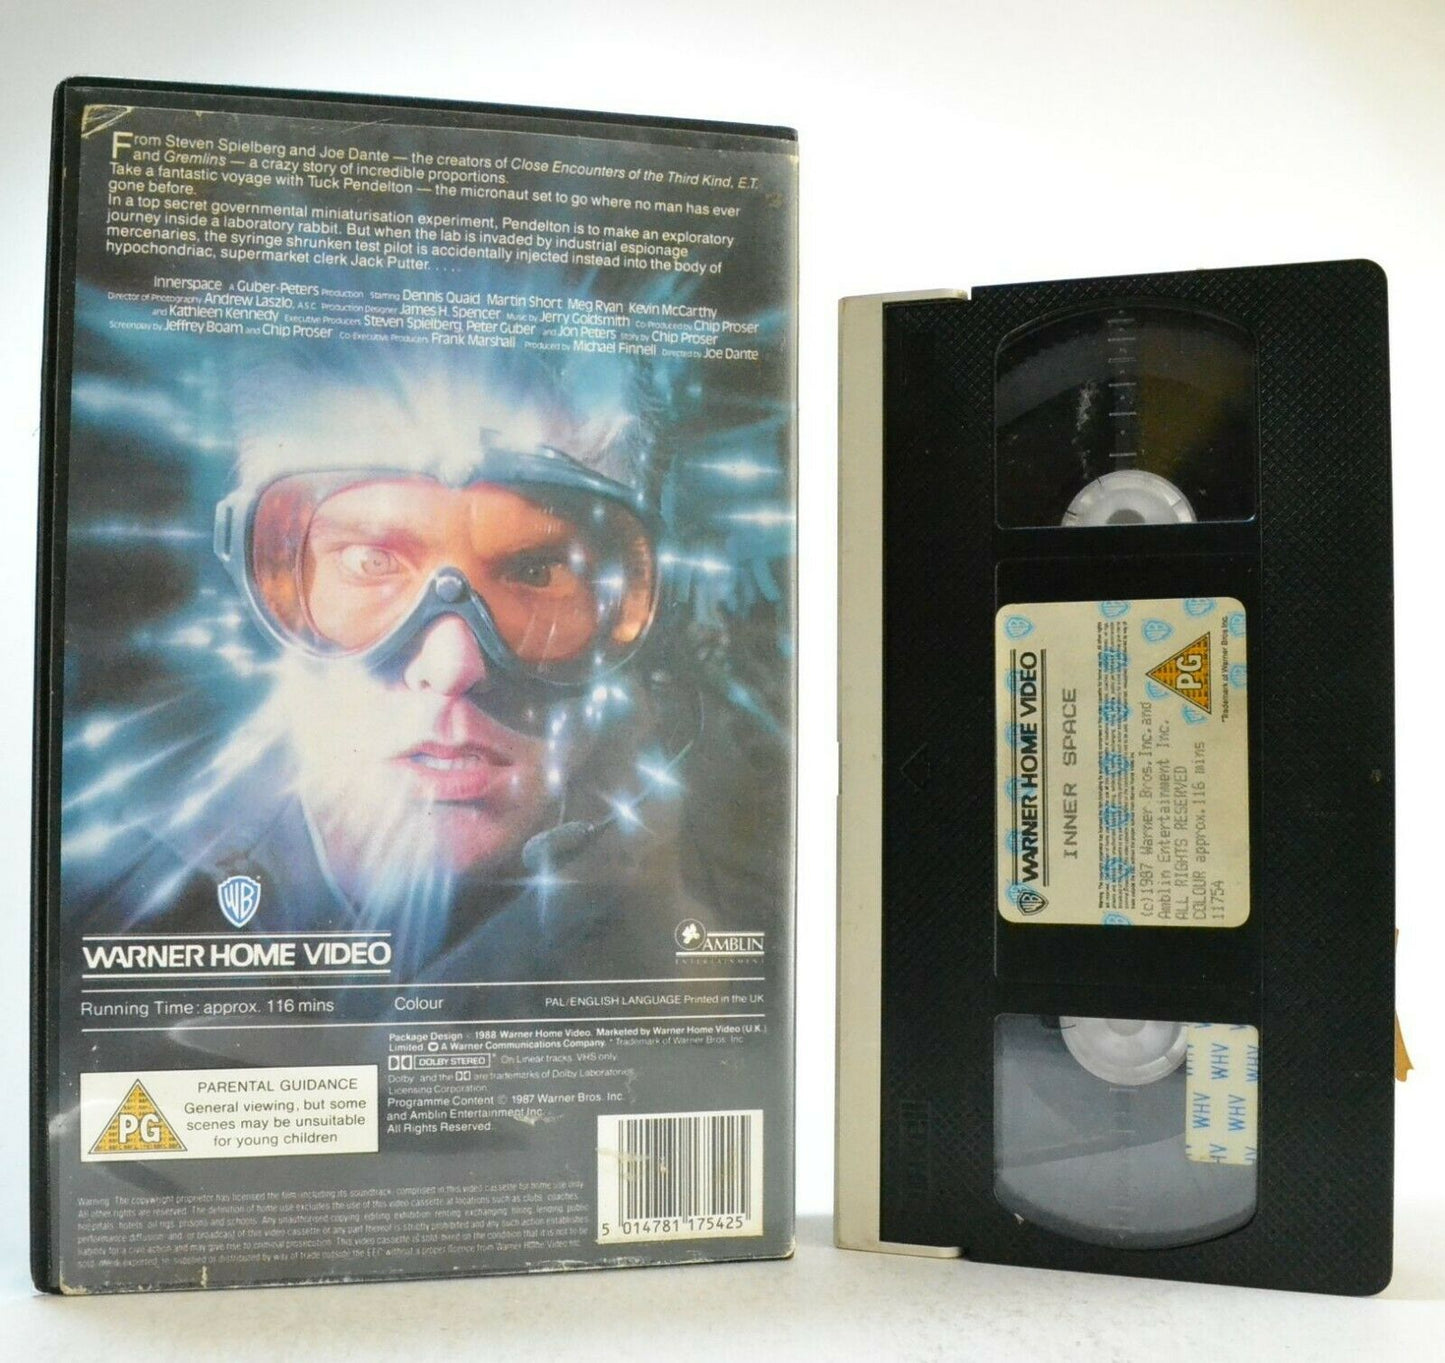 Inner Space: "Fantastic Voyage" Inspired Film - Large Box - D.Quaid - Pal VHS-